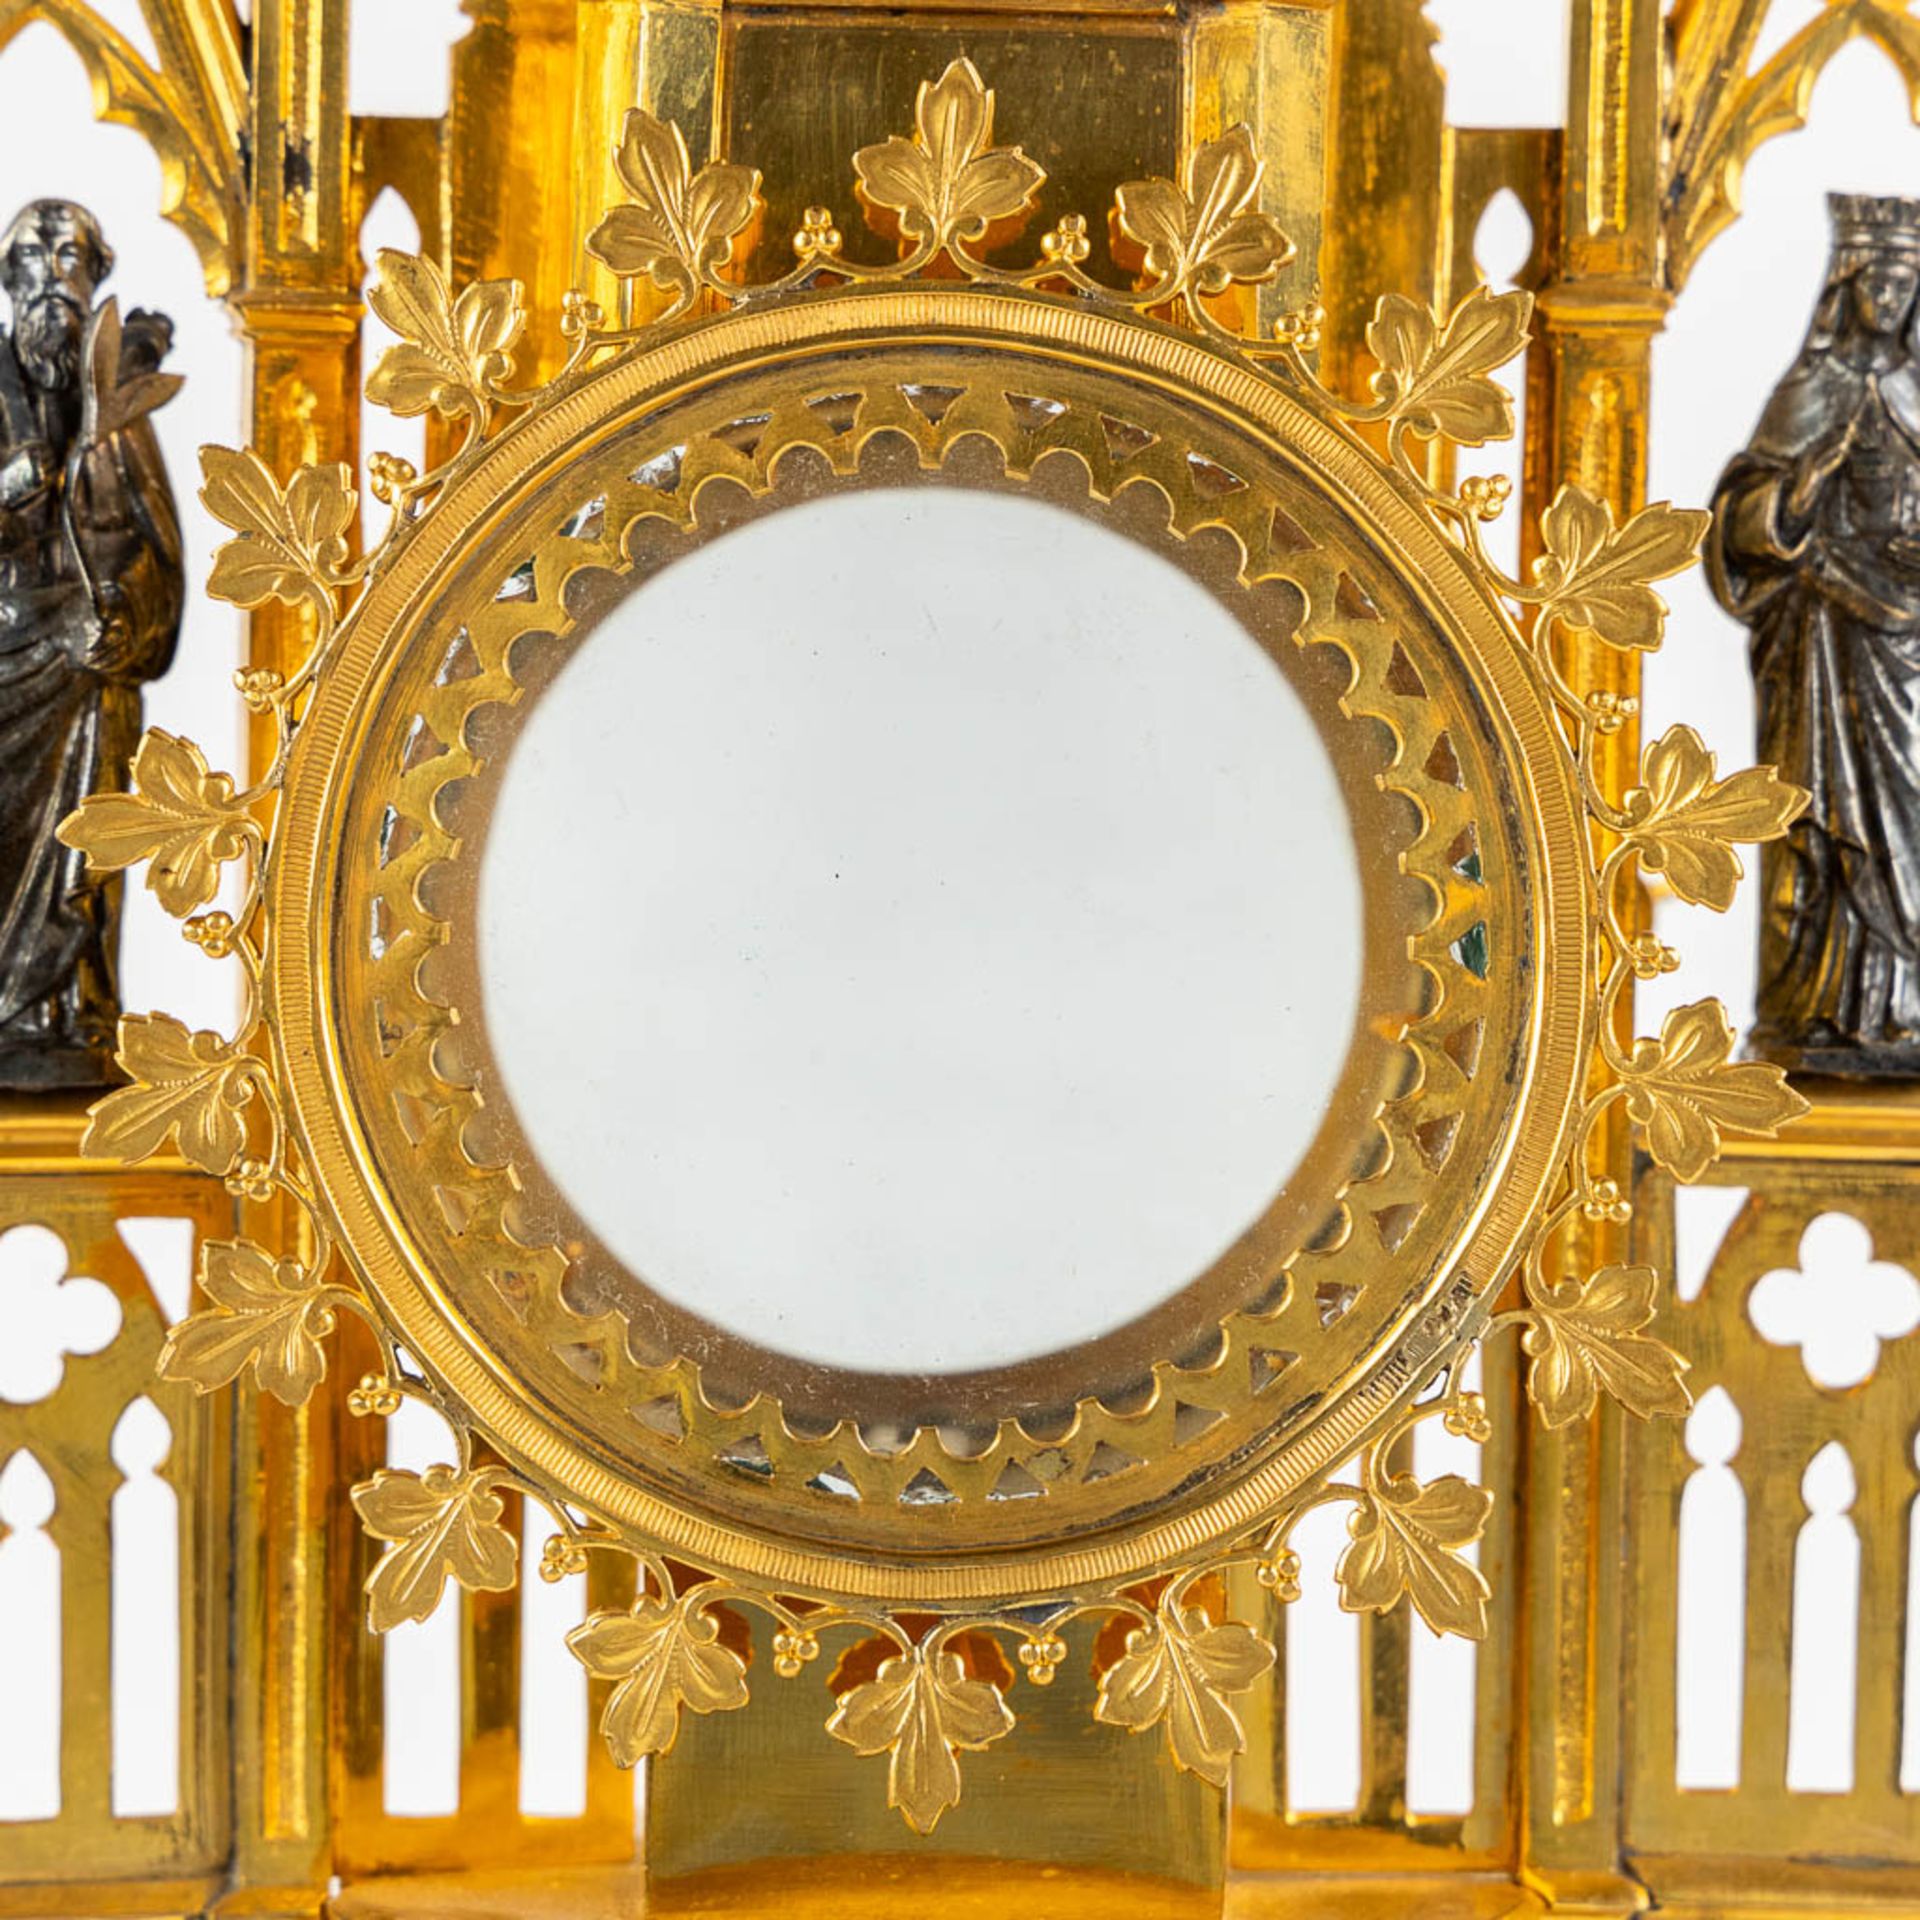 A Tower monstrance, gilt and silver plated brass, Gothic Revival. 19th C. (W:21,5 x H:58 cm) - Bild 5 aus 22